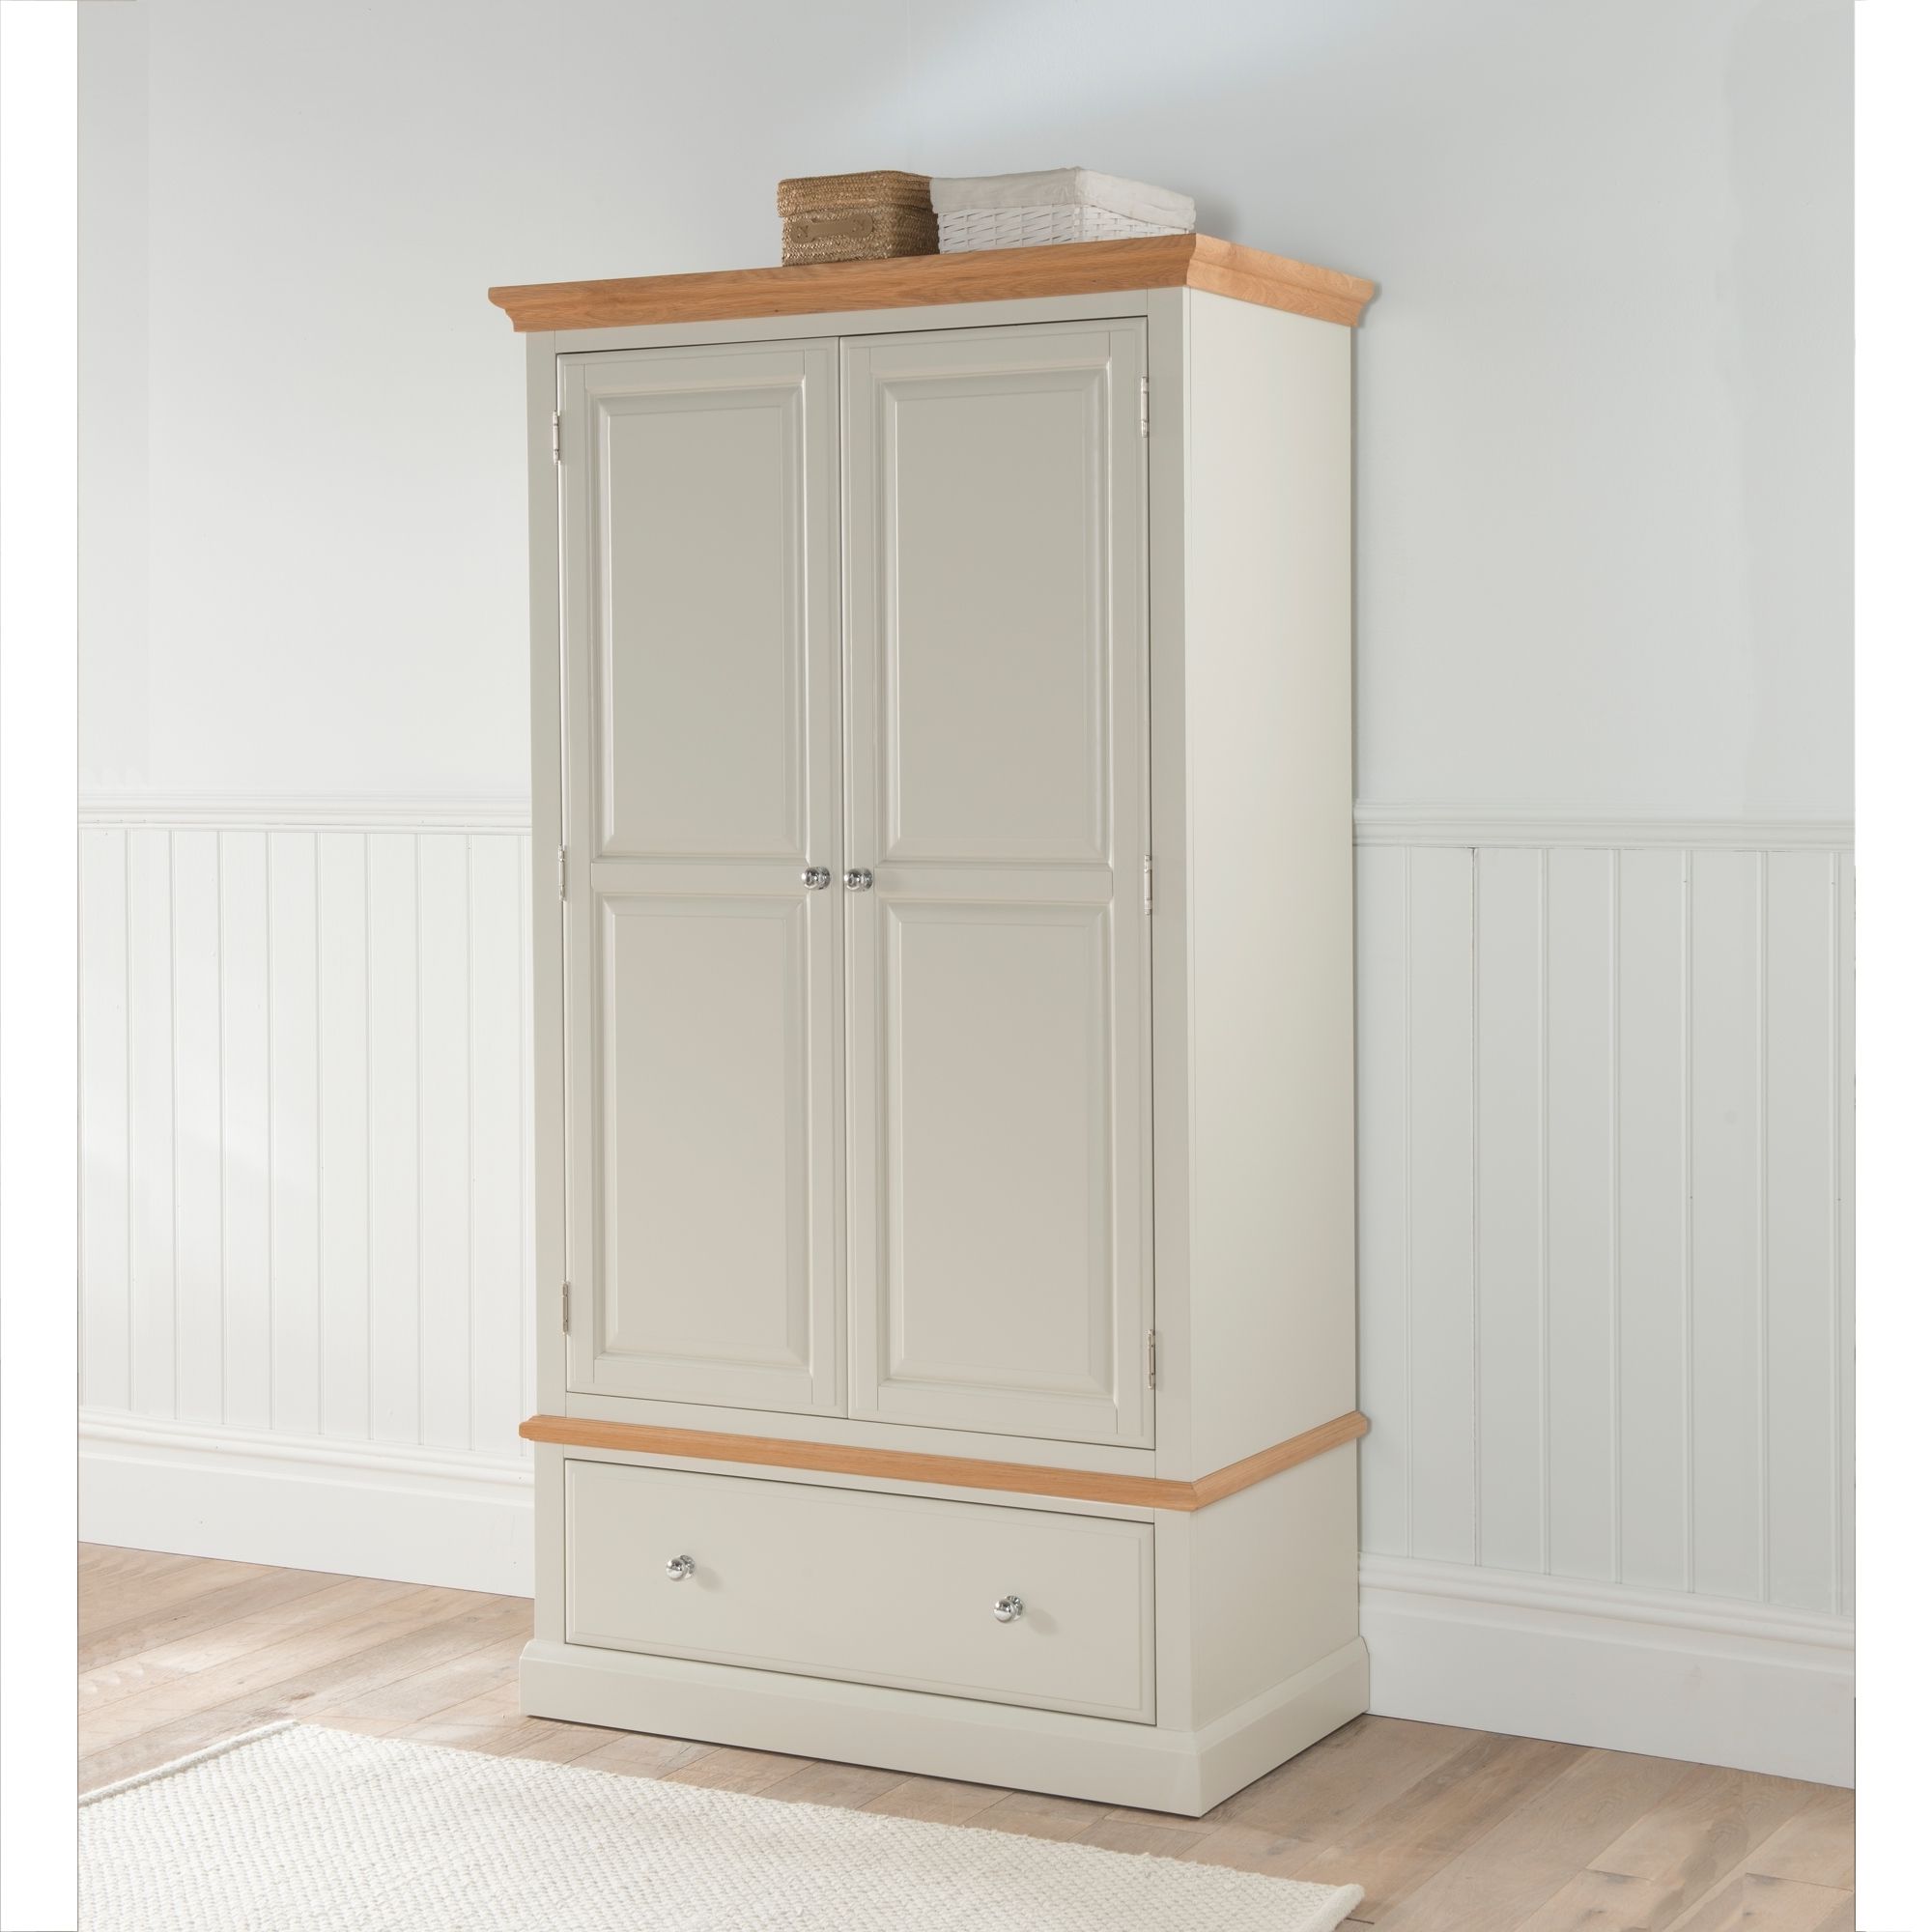 Remi Shabby Chic Wardrobe | Online From Homesdirect365 Inside Shabby Chic Wardrobes For Sale (Gallery 1 of 20)